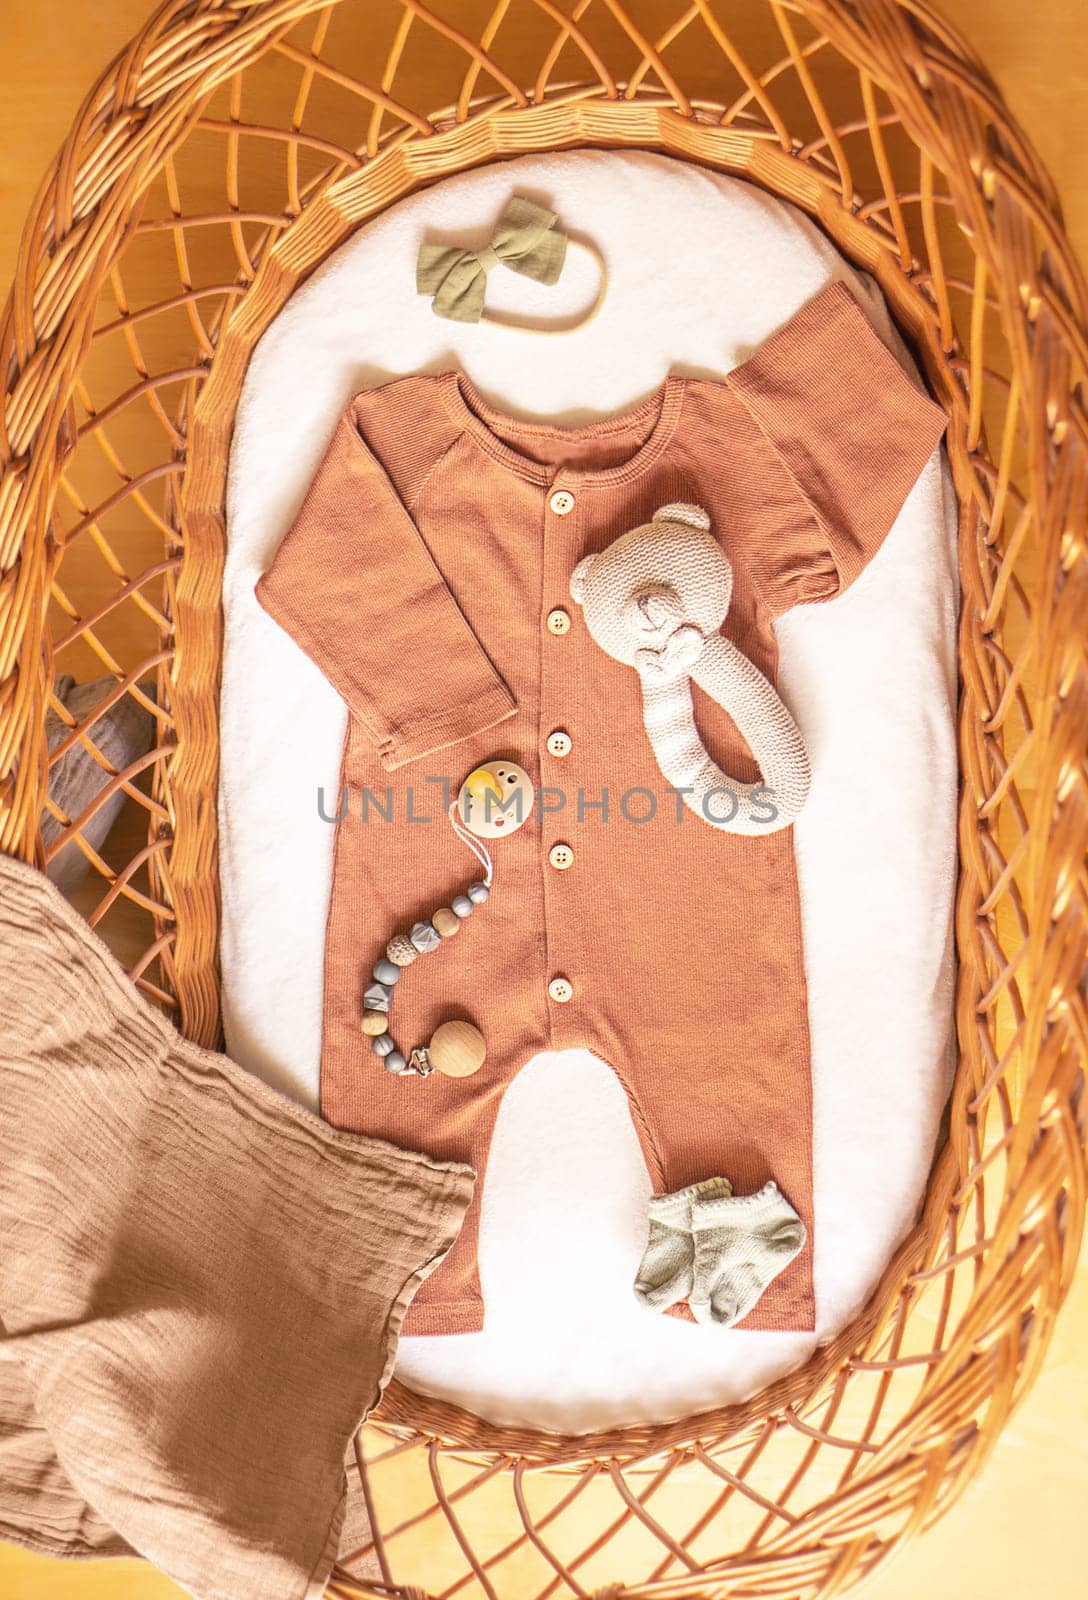 Baby clothes and accessories in basket bassinet. by tanjas_photoarts